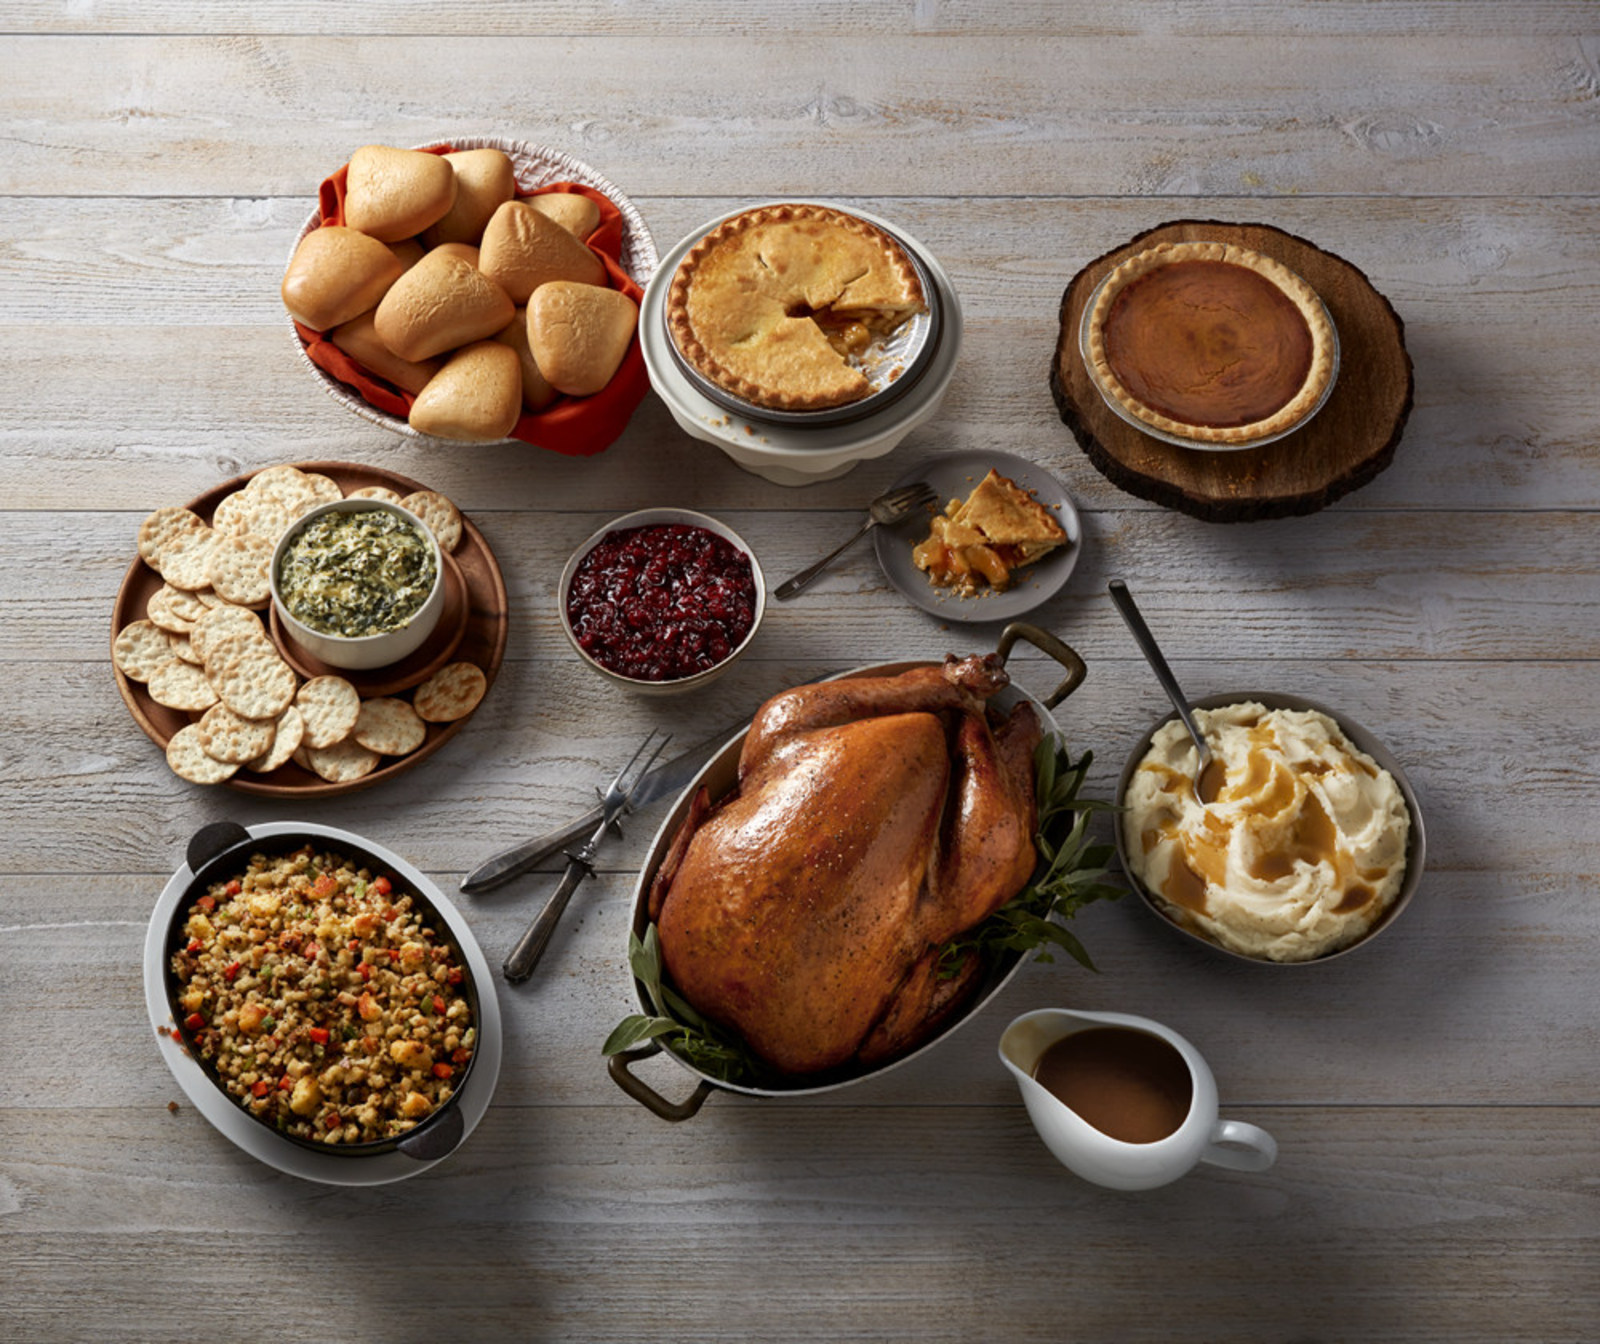 Boston Market Helps Put Joy On The Table This Thanksgiving With